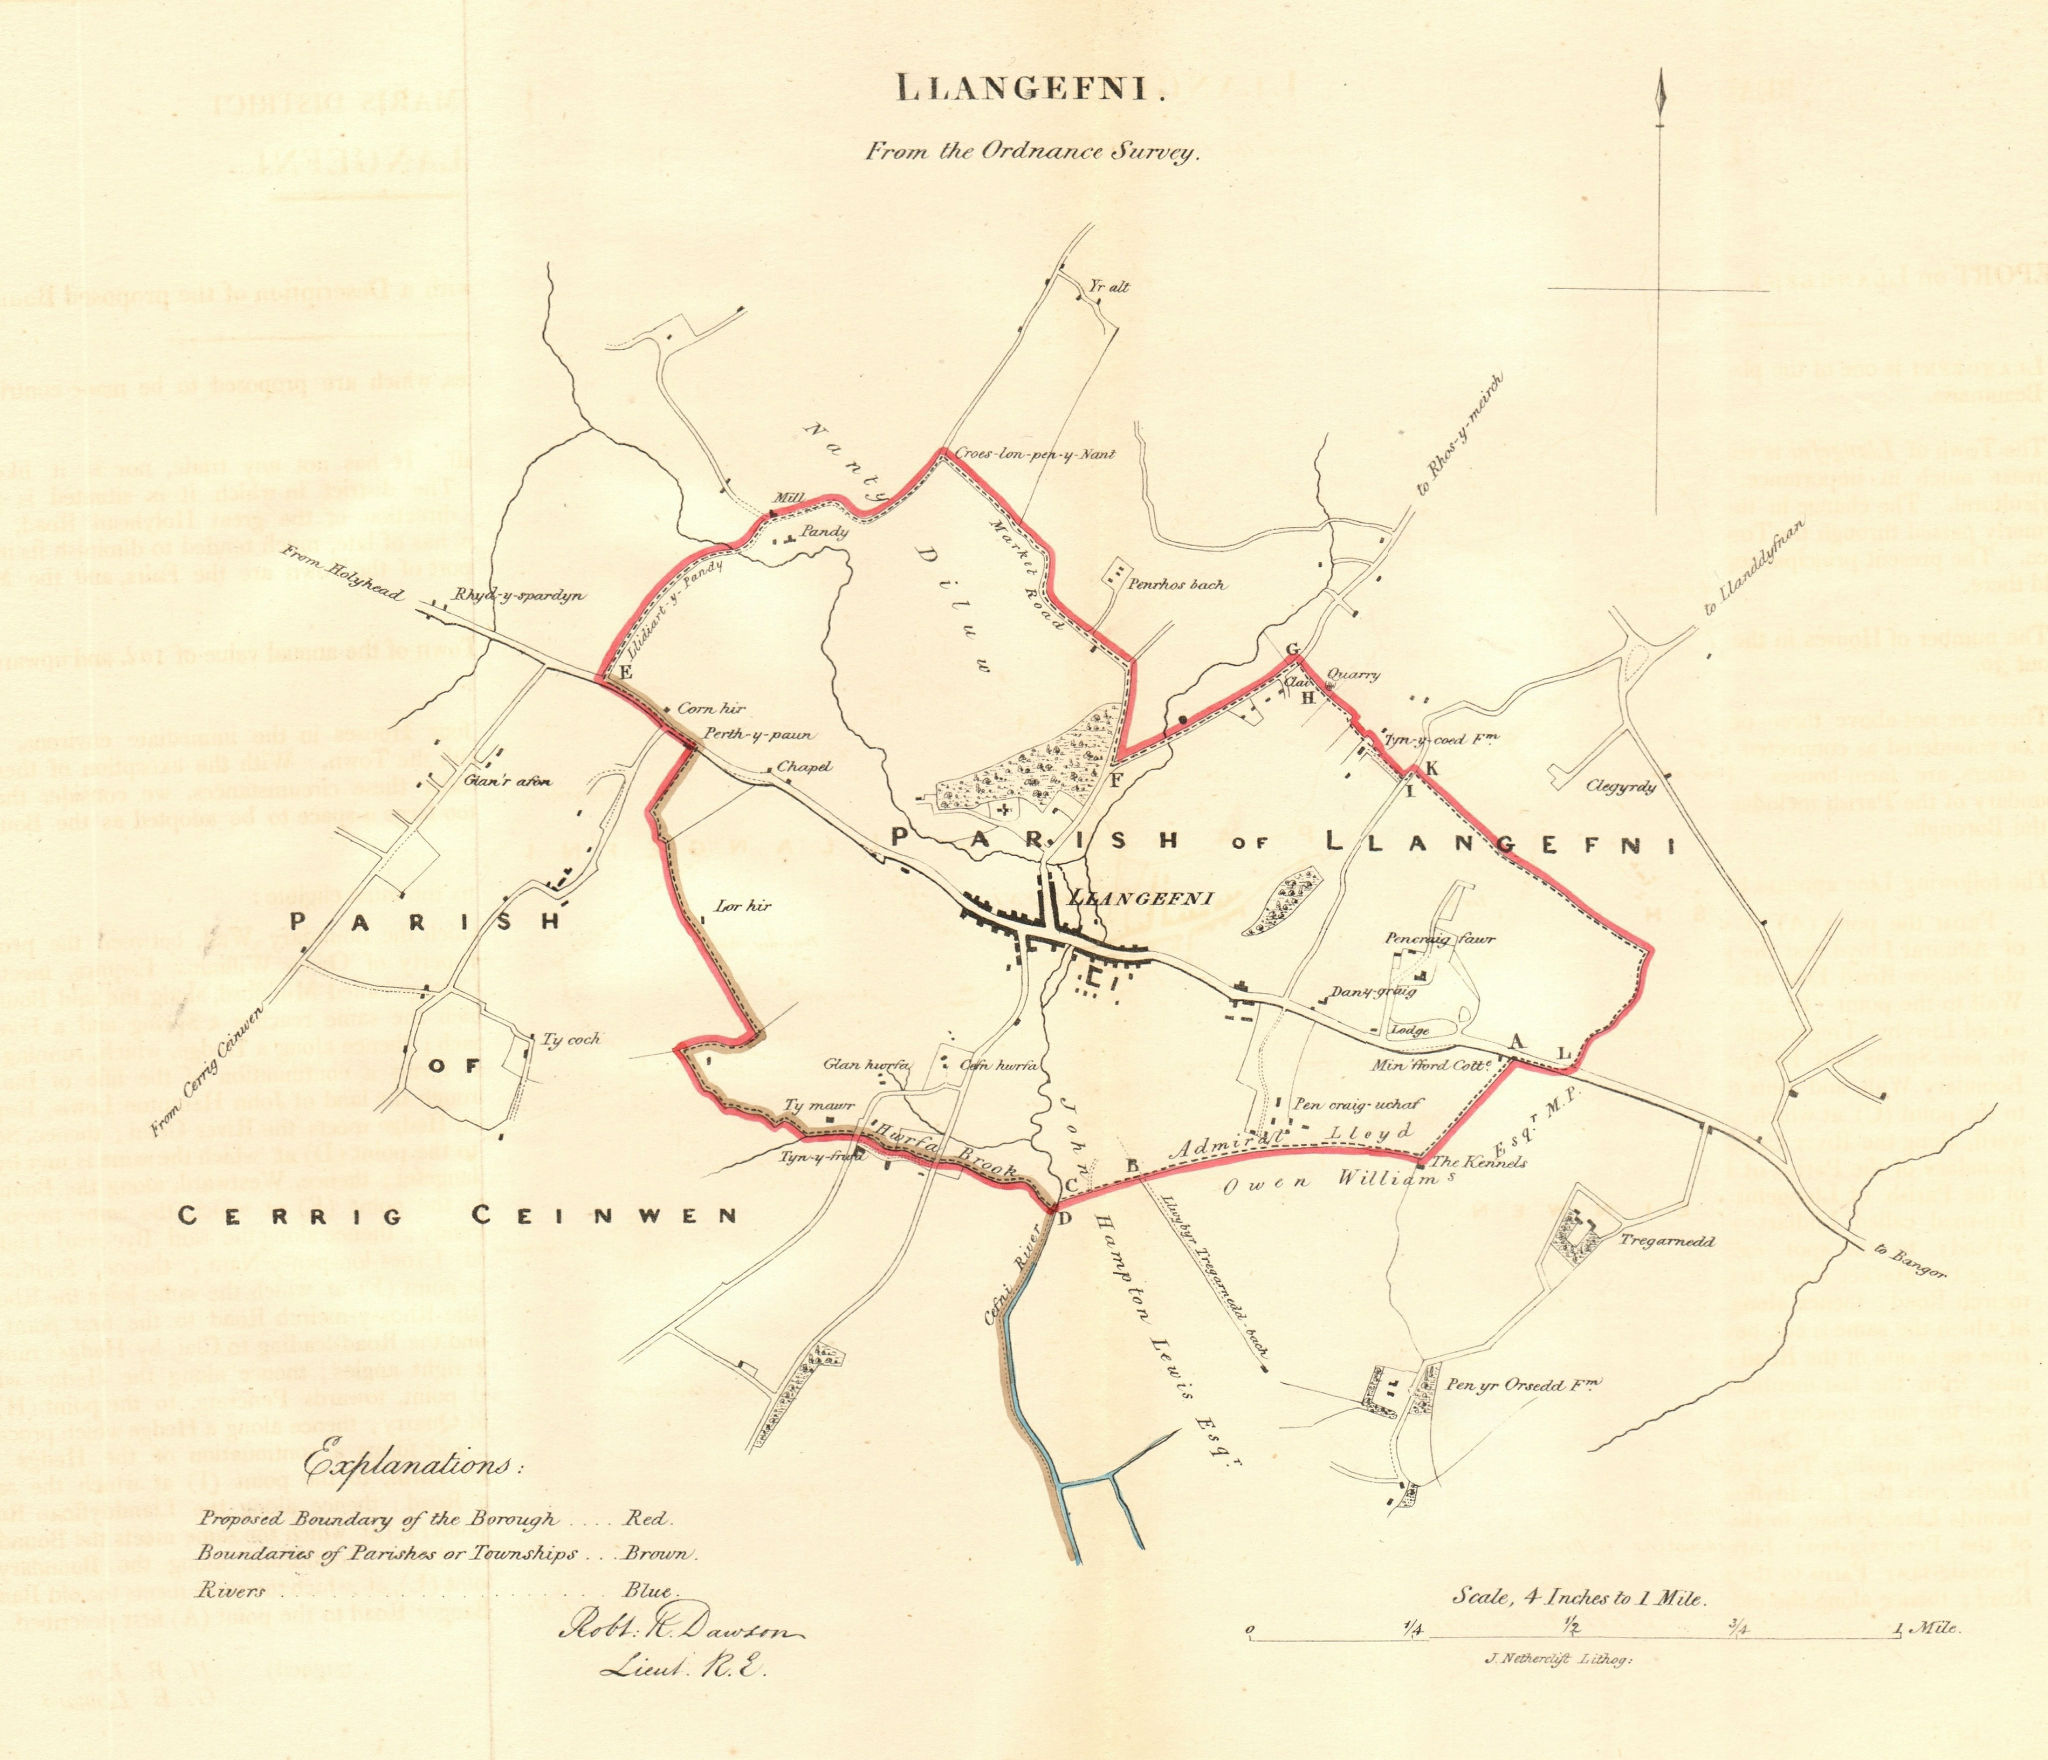 Associate Product LLANGEFNI borough/town plan for the REFORM ACT. Wales. DAWSON 1832 old map